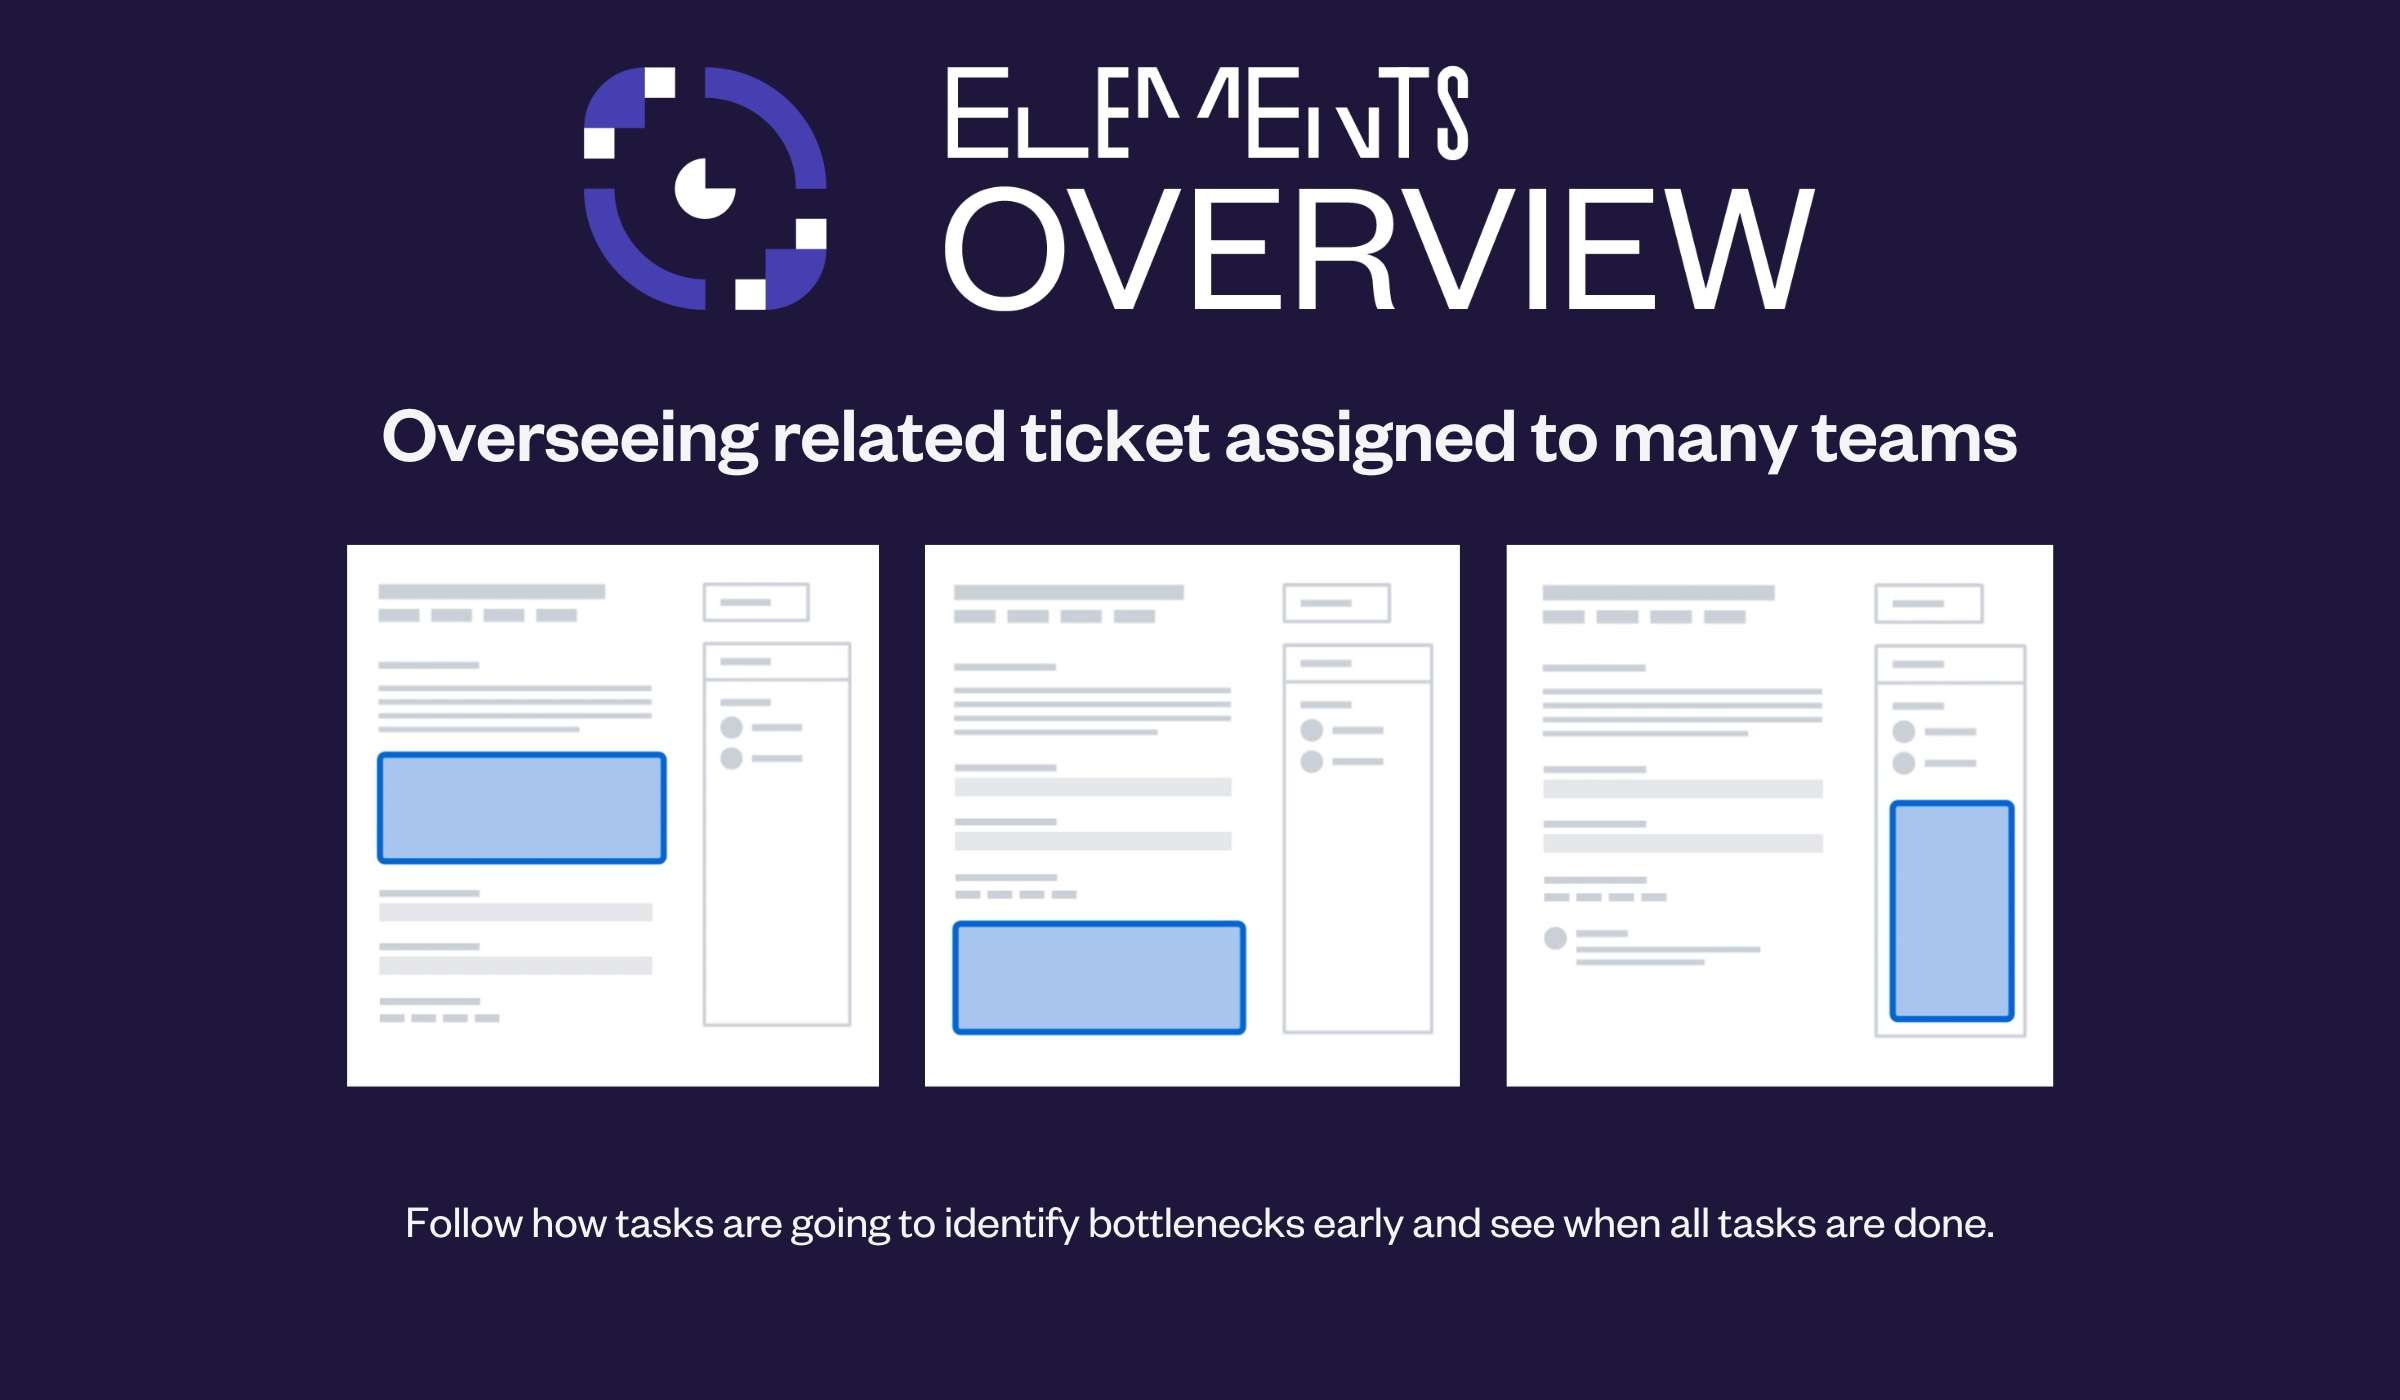 Elements Overview can help you oversee related tickets assigned to many teams. 

Let's see the case of onboarding a new team member: many teams are usually involved and have tasks assigned. 
The manager needs to follow how is the onboarding going, identify bottlenecks early and see when all tasks are done. 
